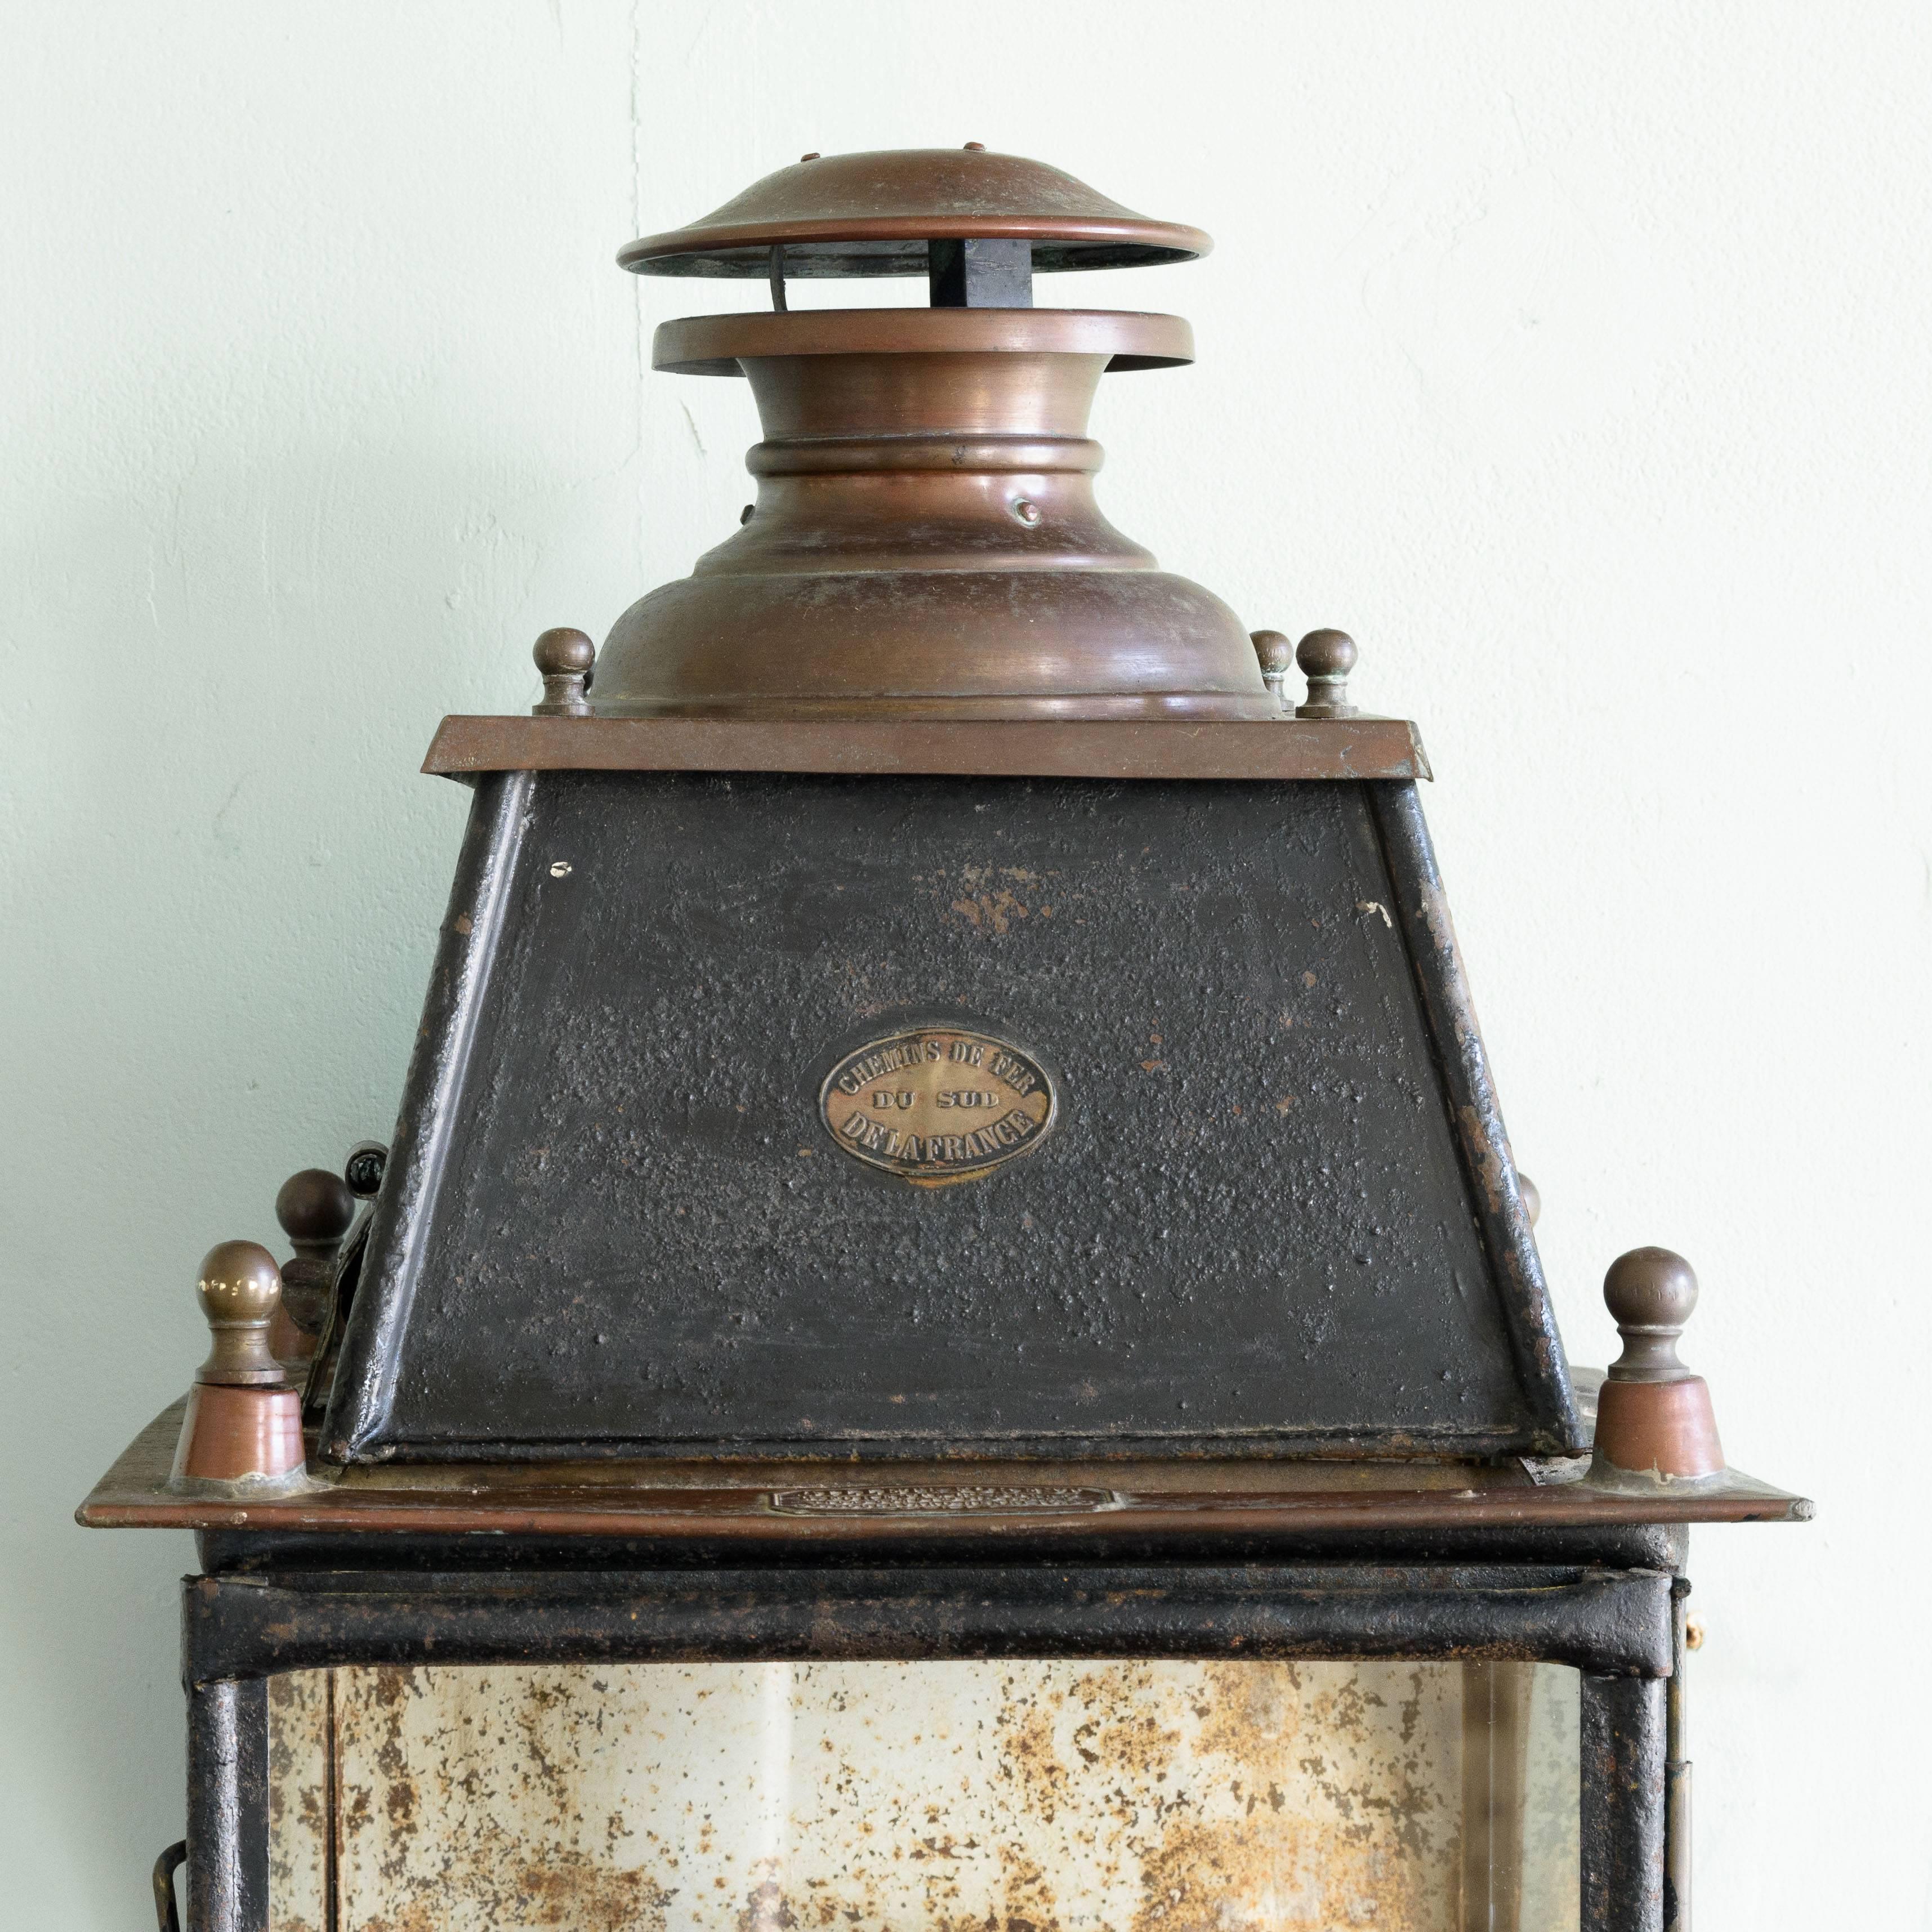 19th century French wall lantern, the shaped funnel lid above roof with finials leading to glazed body with single light fitment.